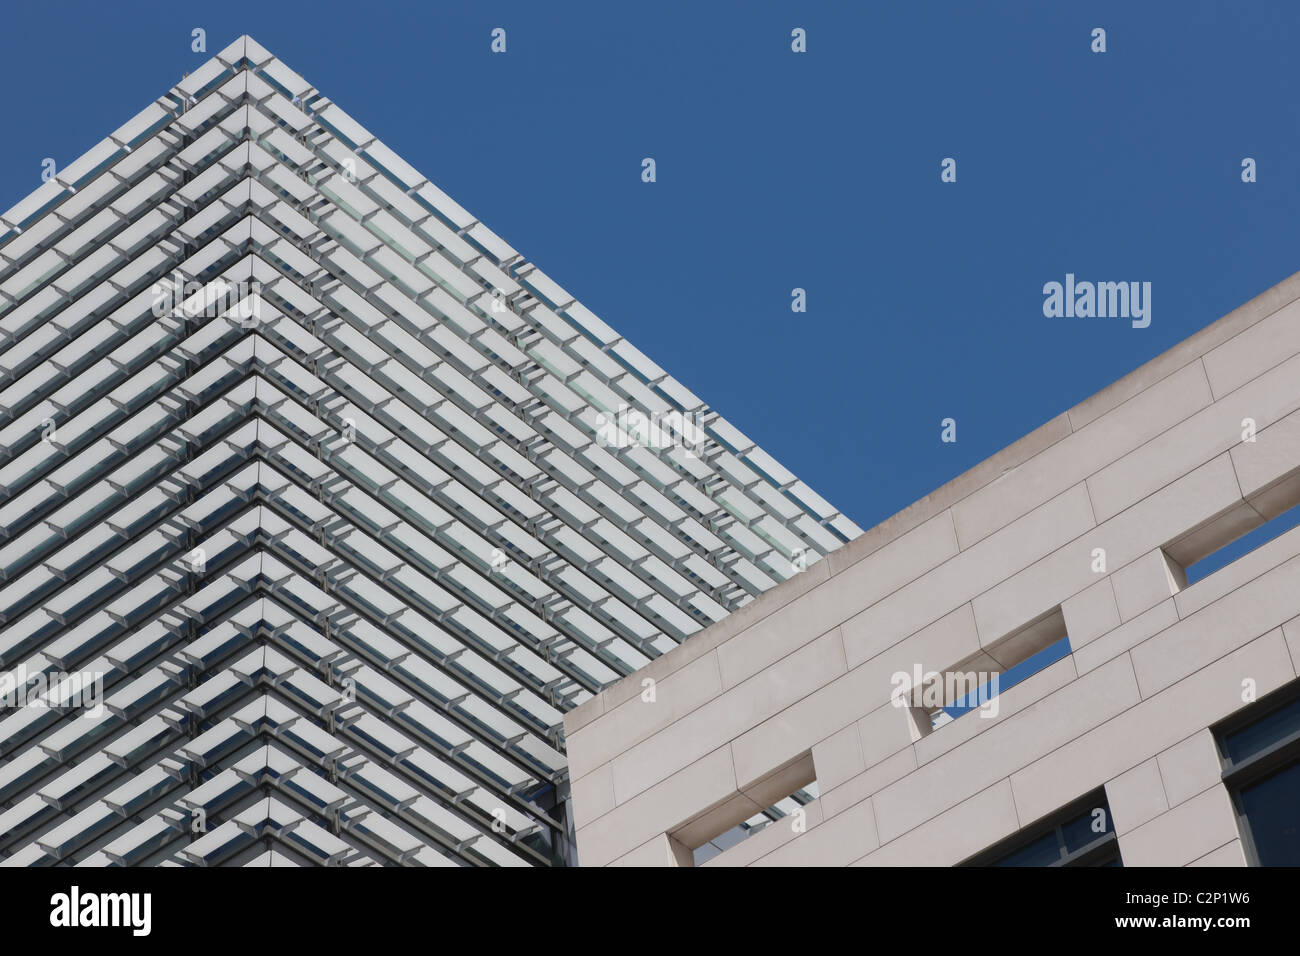 Contrasting facades of the Newseum and an adjacent building in Washington, DC. Stock Photo